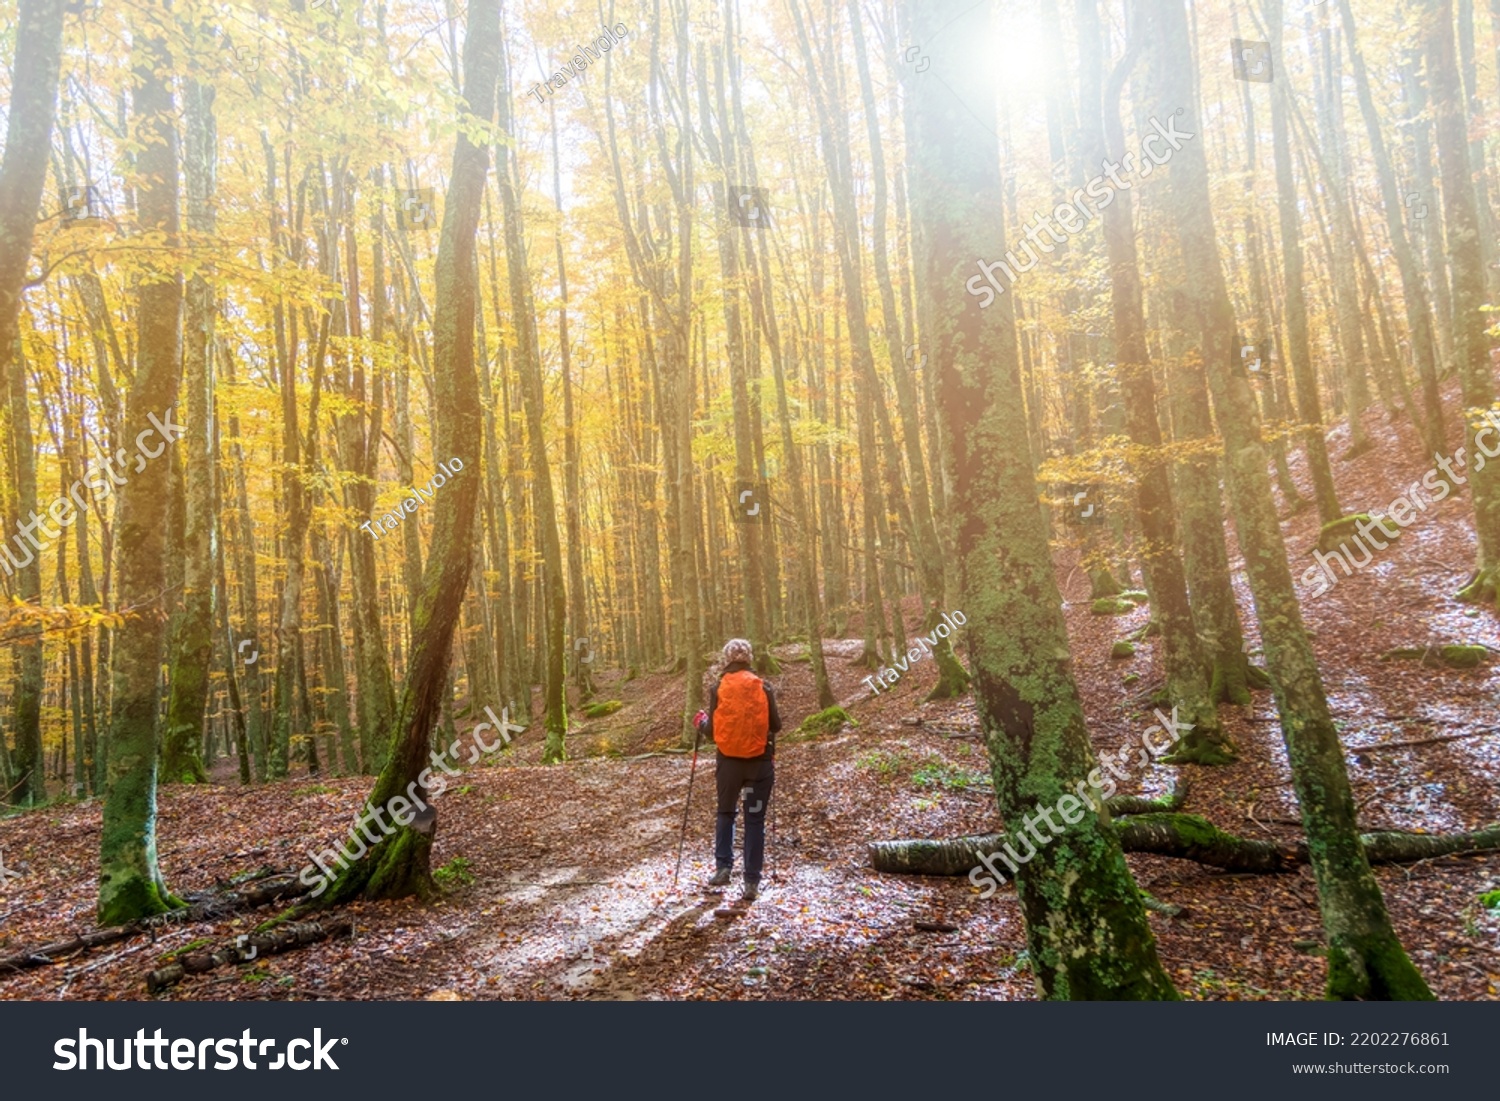 Young woman hiker on a trail during fall foliage season with yellow and orange leaves in a forest in autumn. Parco Nazionale delle Foreste Casentinesi, Tuscany, Italy #2202276861